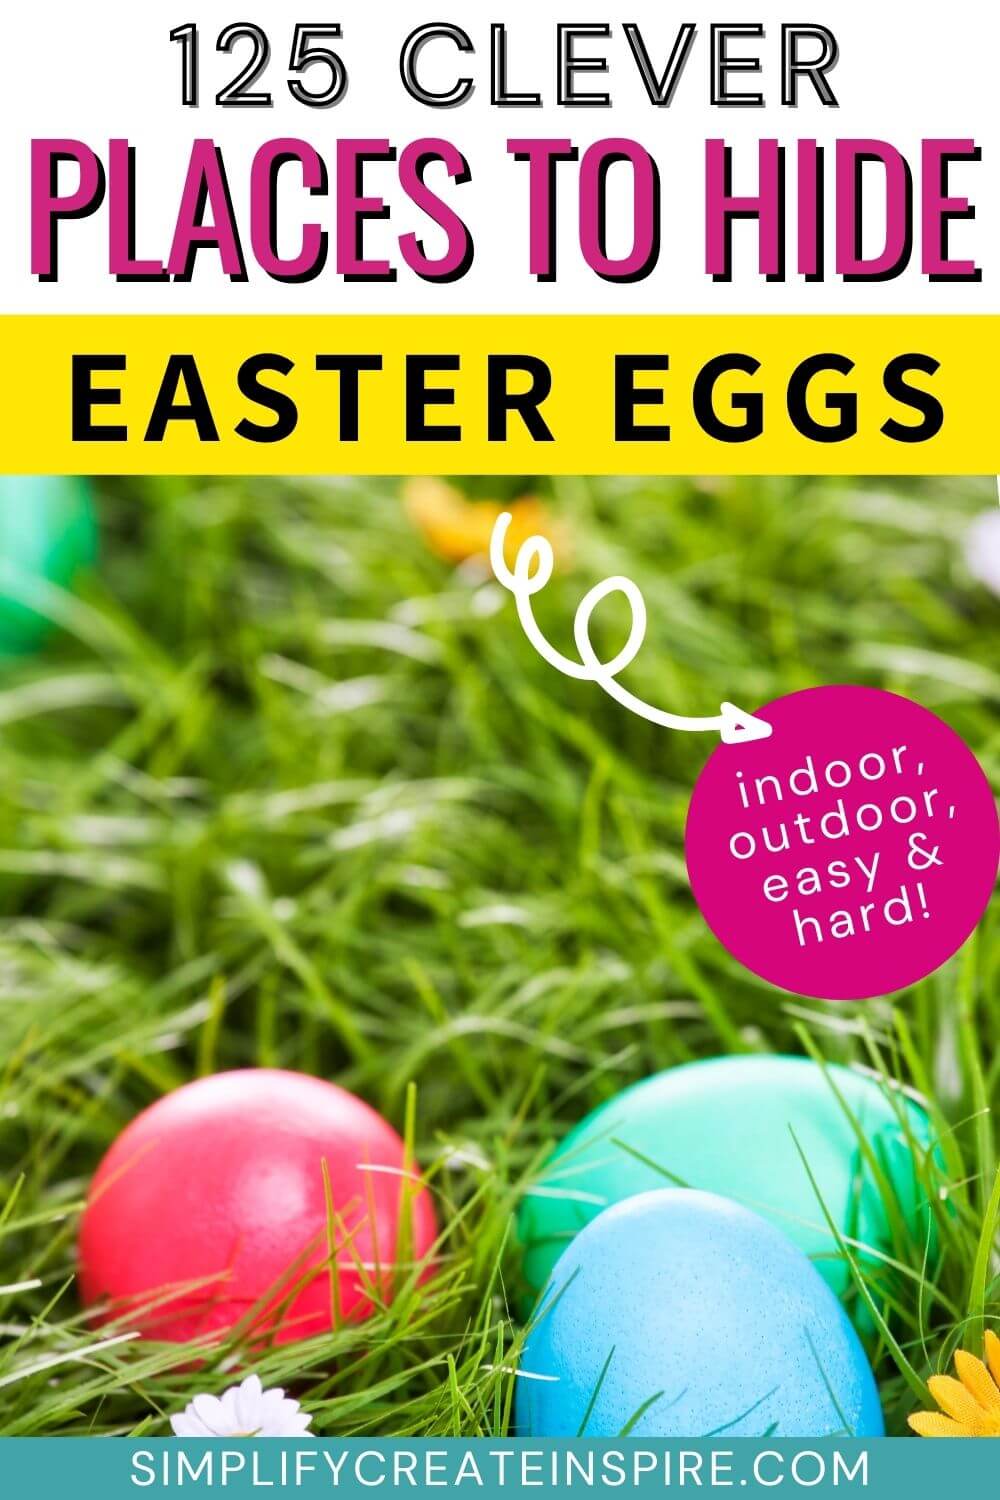 Pinterest image - text reads best places to hide easter eggs